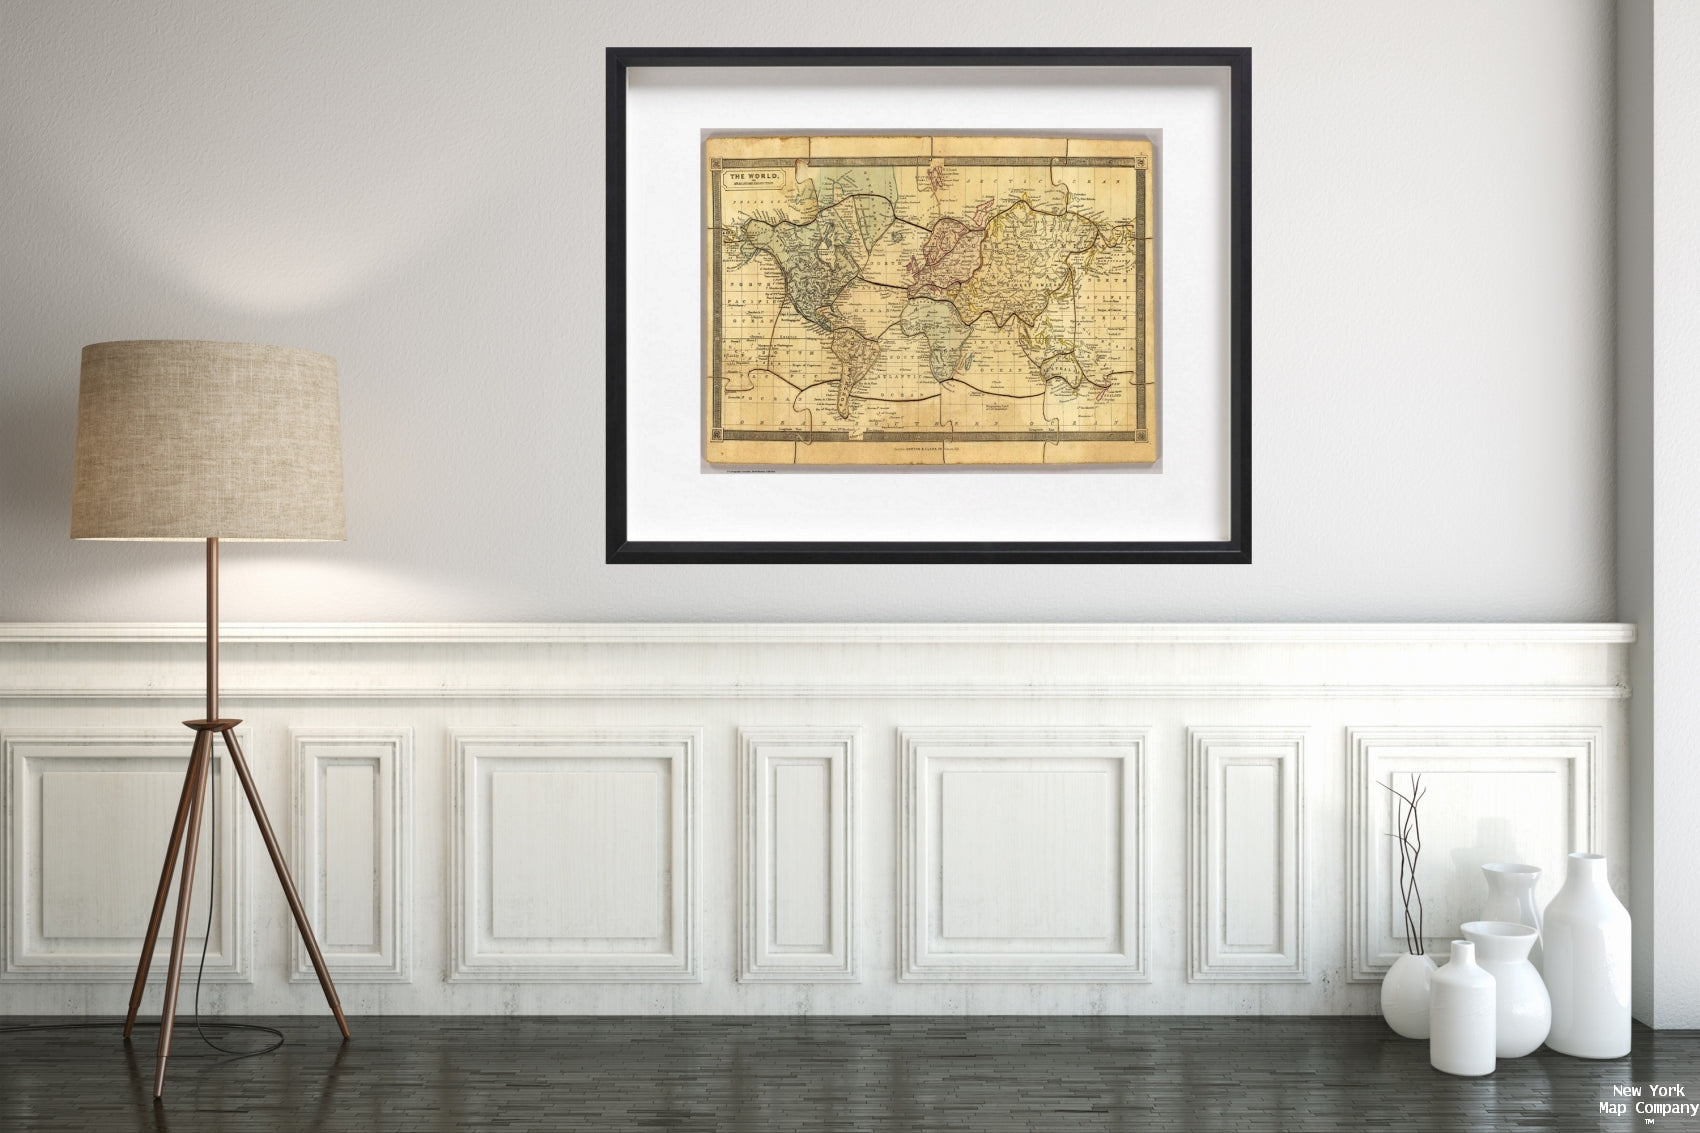 The World on Mercators Projection. London, Darton and Clark, 58 Holborn Hill., Humphries Dissected Map Of The World. Warrented Perfect., The full-color vintage map is titled á´The World, On Mercator's Projection" and is published by Darton and Clark of L